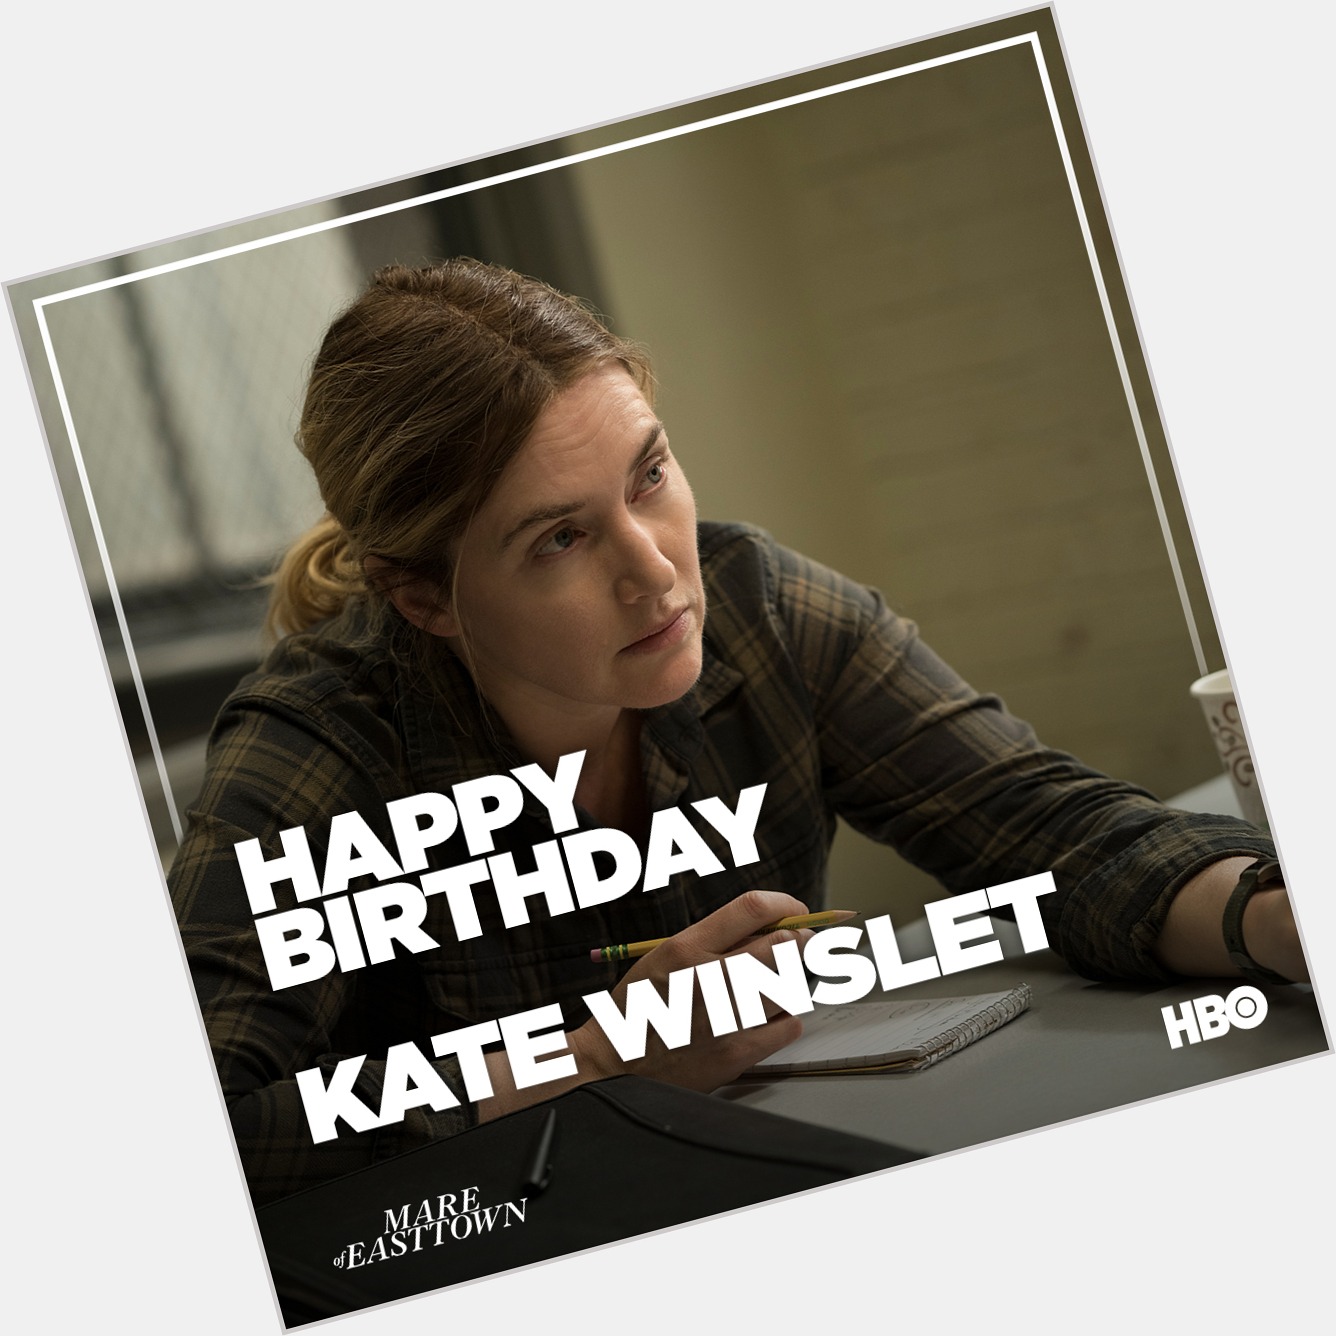 Happy Birthday Kate Winslet, a British acting icon and the Emmy-winning star of 